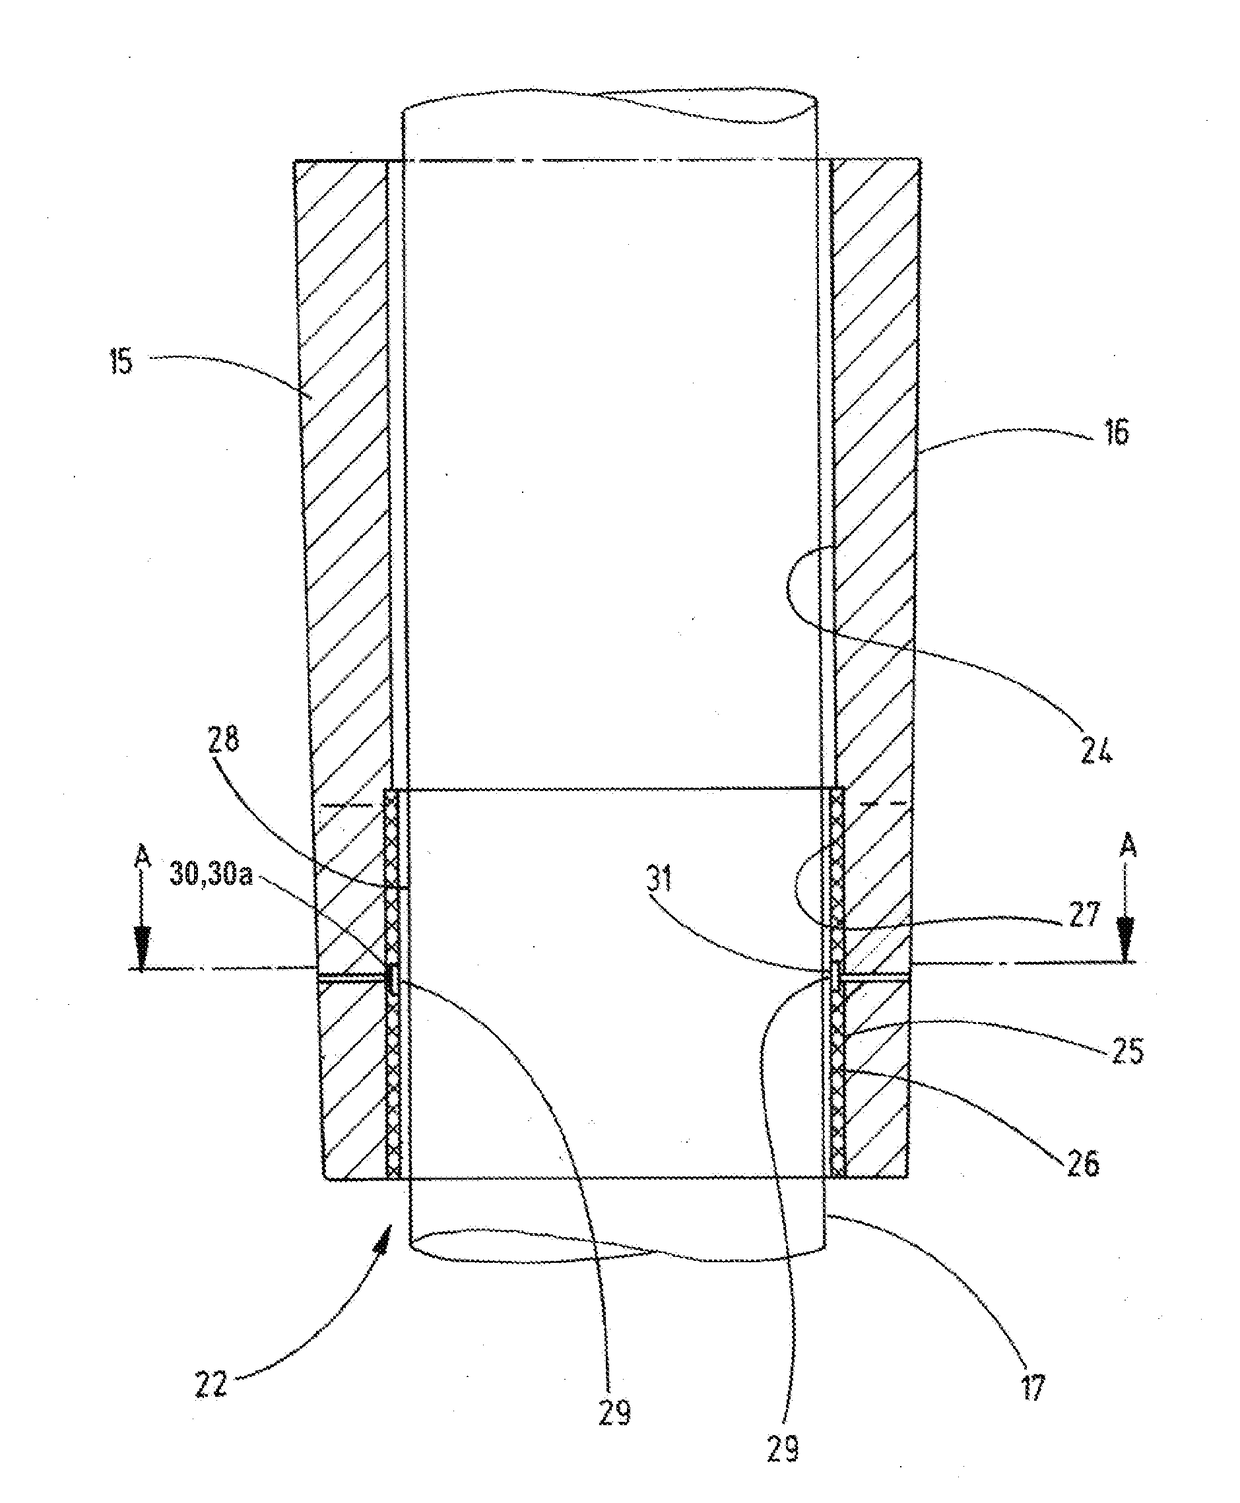 Bearing for supporting a shaft, in particular a rudder shaft, or a rudder blade, electronic bearing clearance measuring device, rudder comprising a bearing for supporting a shaft or a rudder blade, and method for measuring wear of a bearing for supporting a shaft or a rudder blade